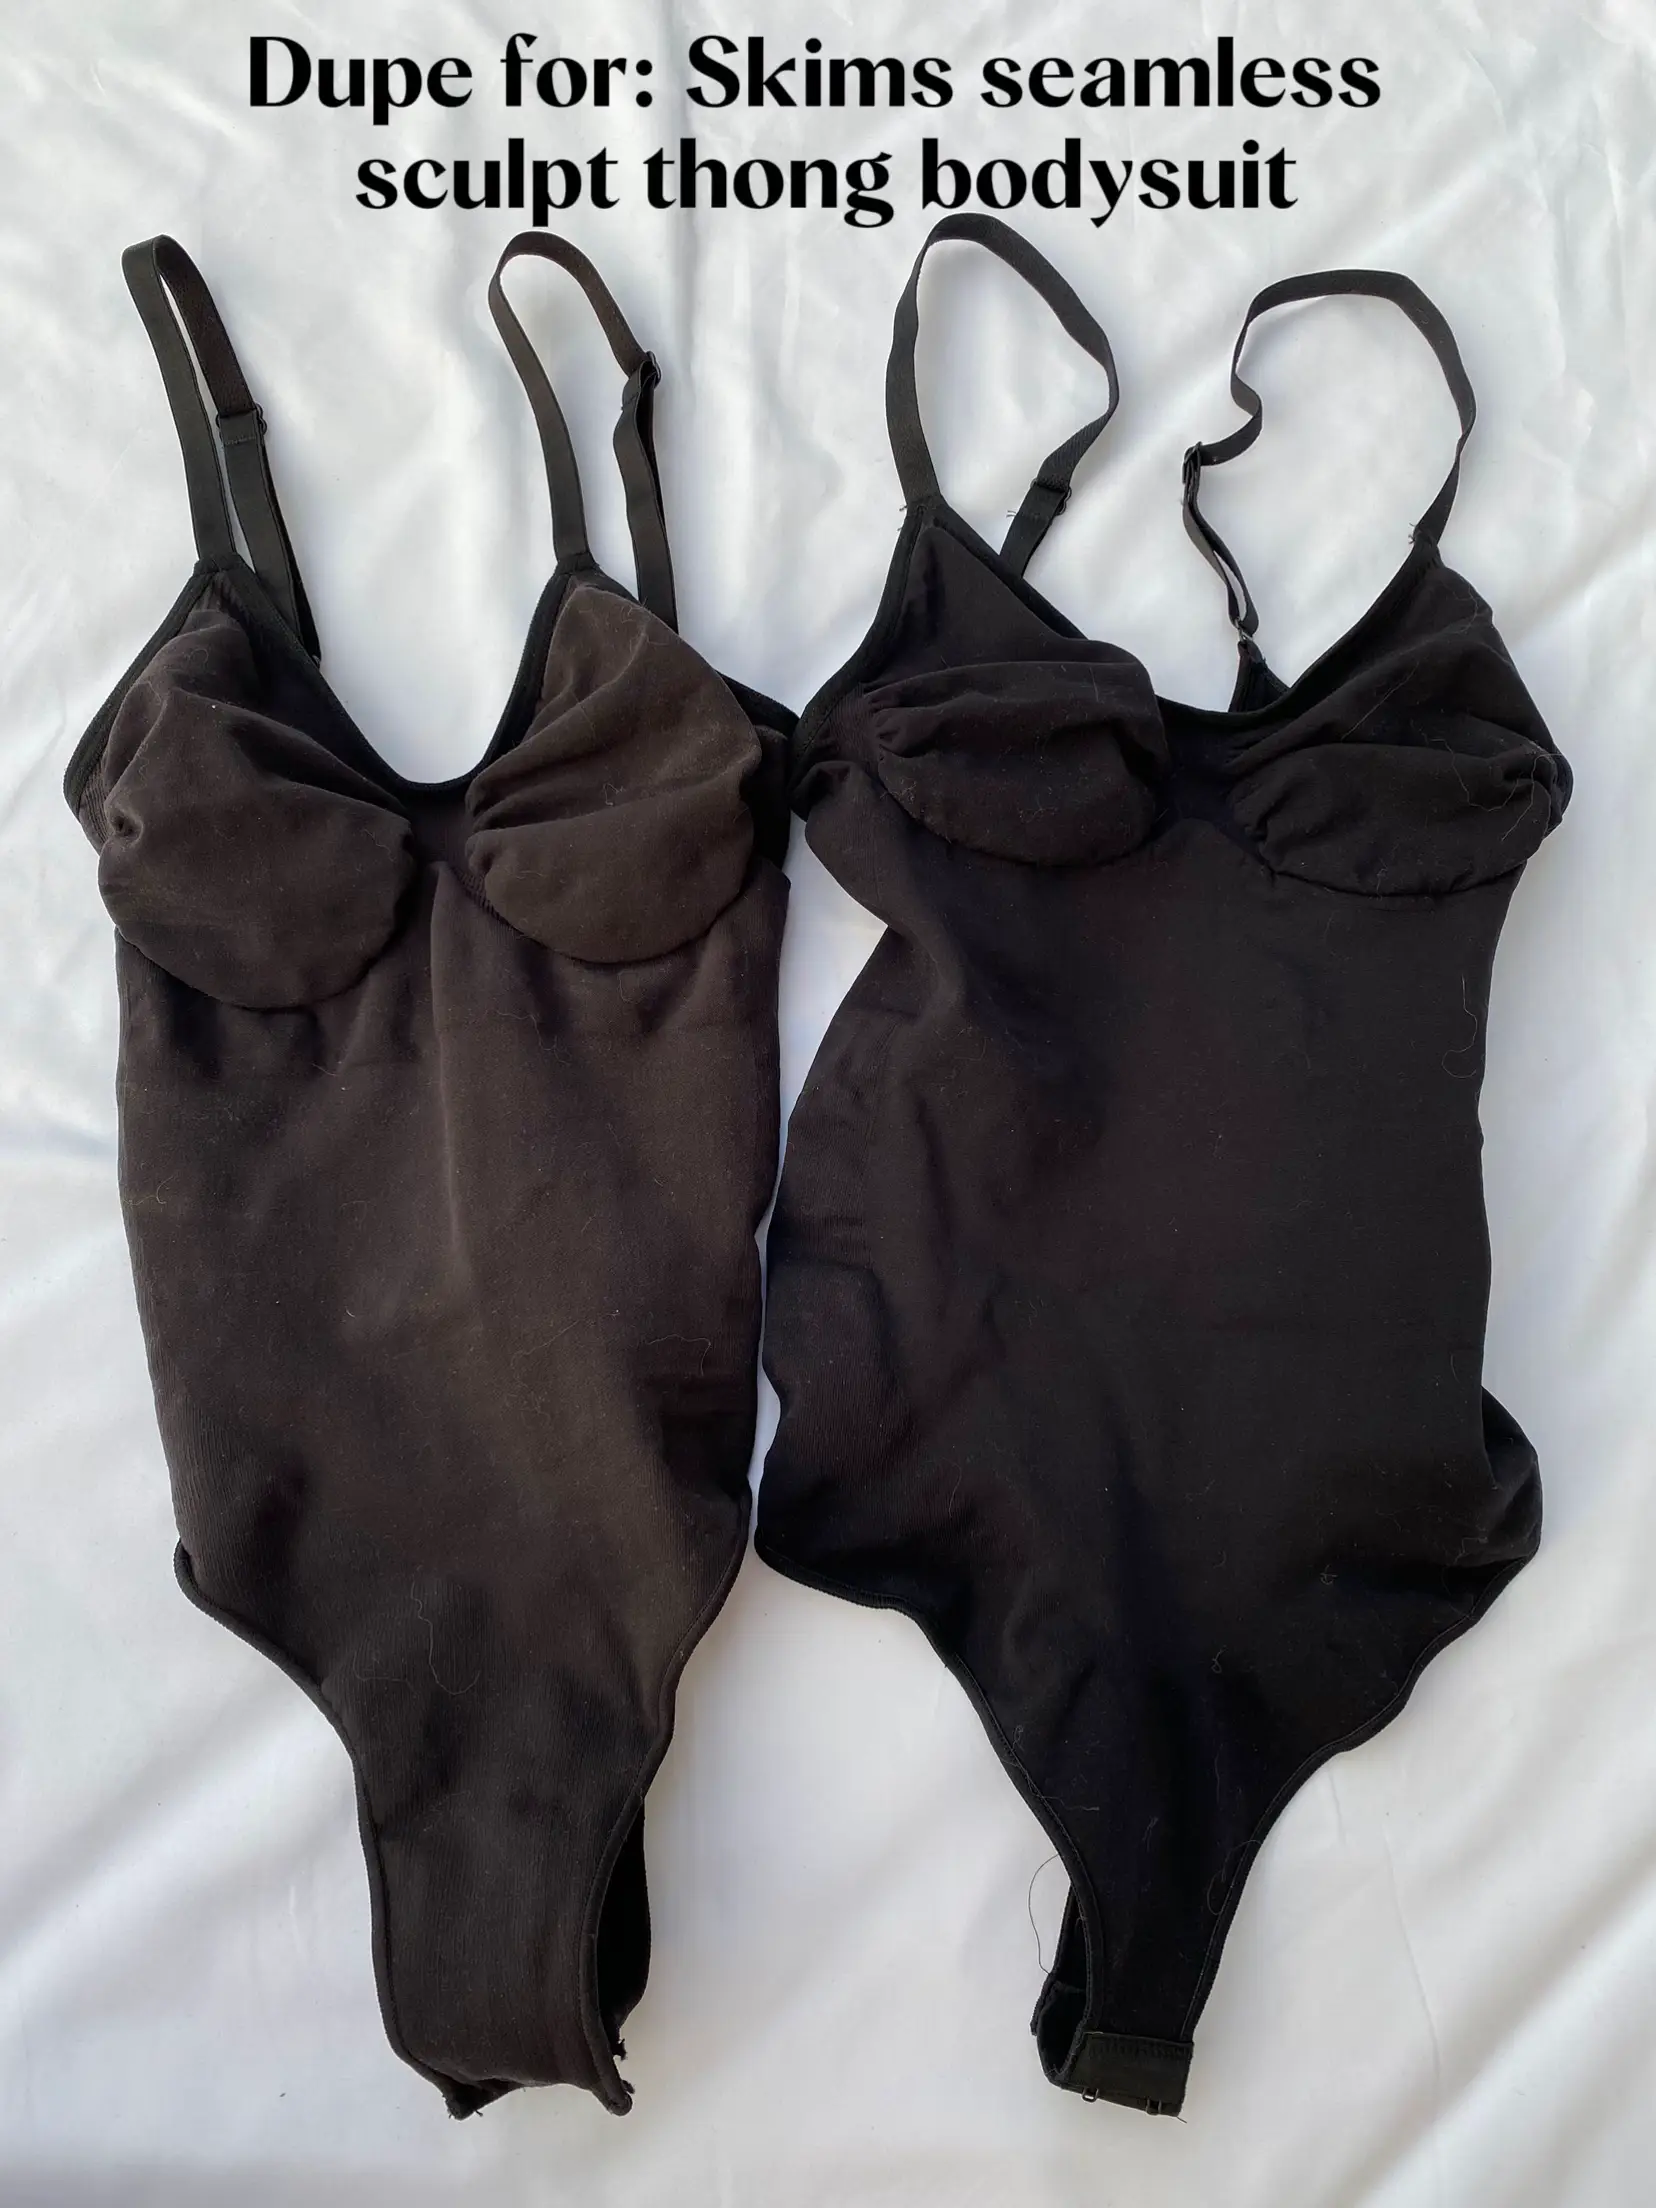 Wolford Bodysuit Dupe, Gallery posted by FlyFierceFab